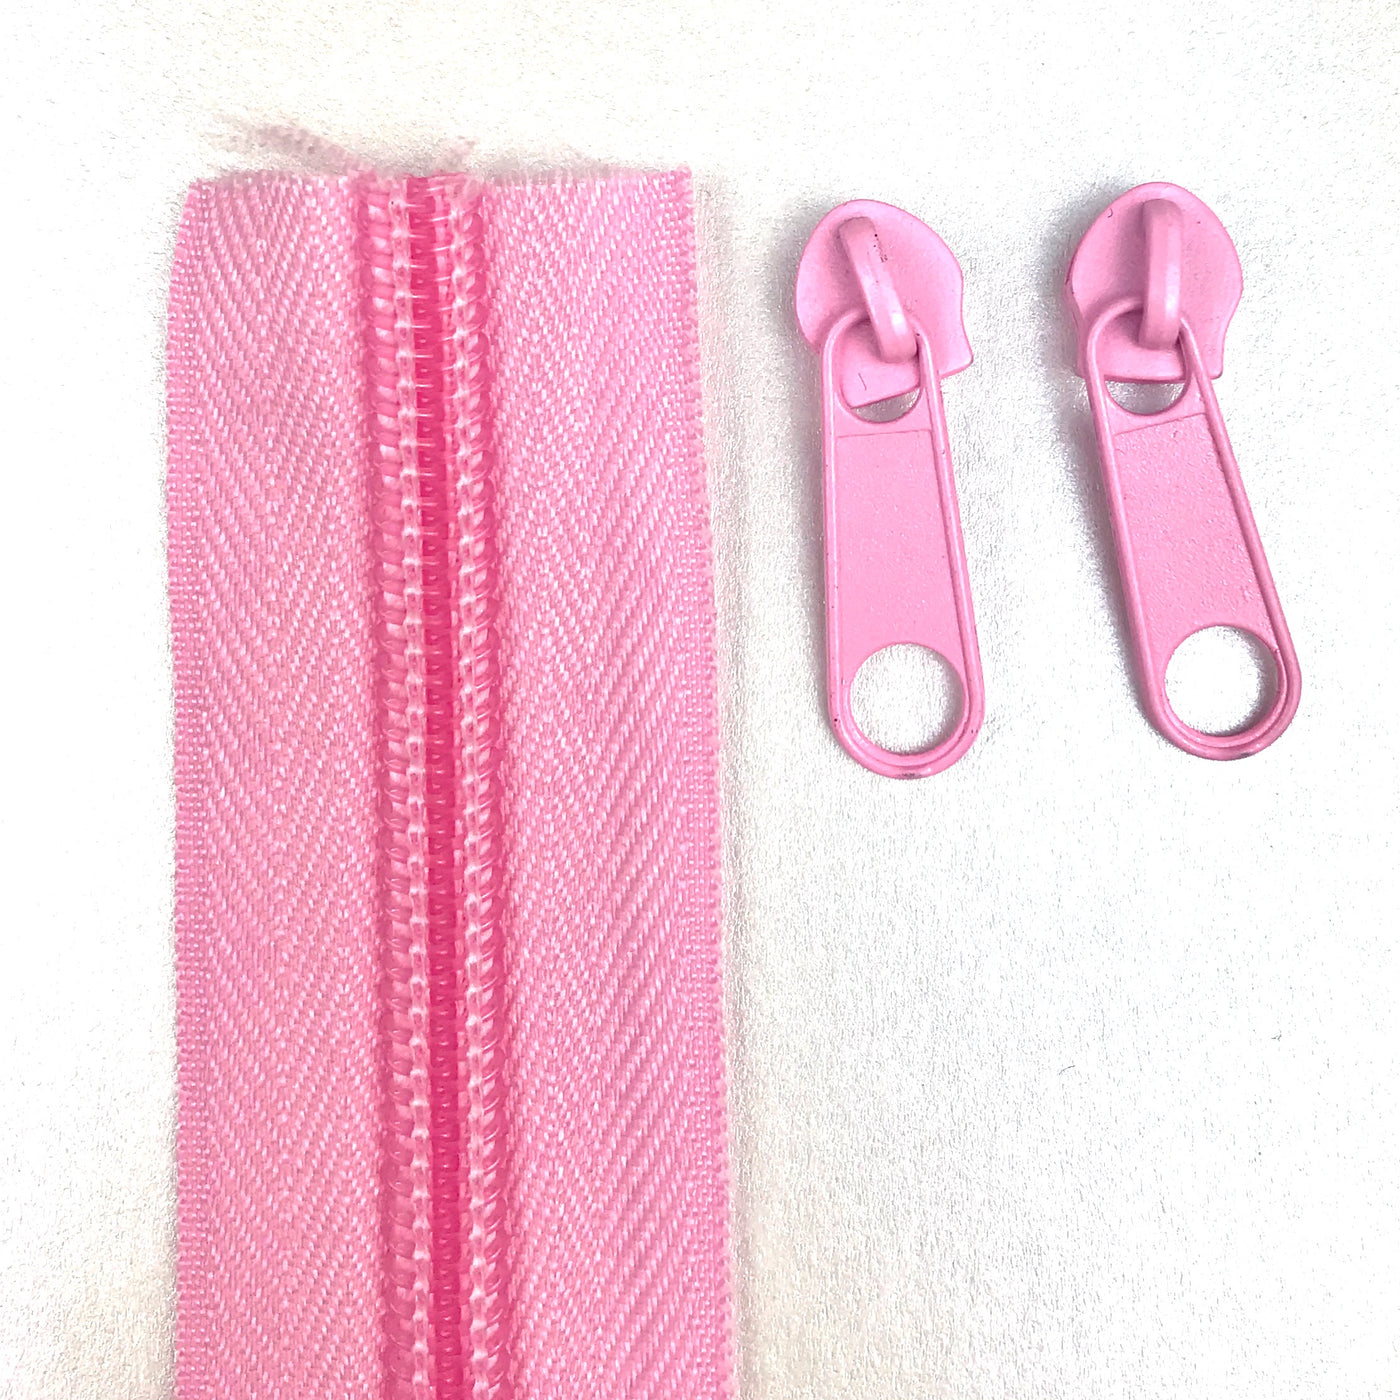 continuous long chain standard zipper tape in light pink